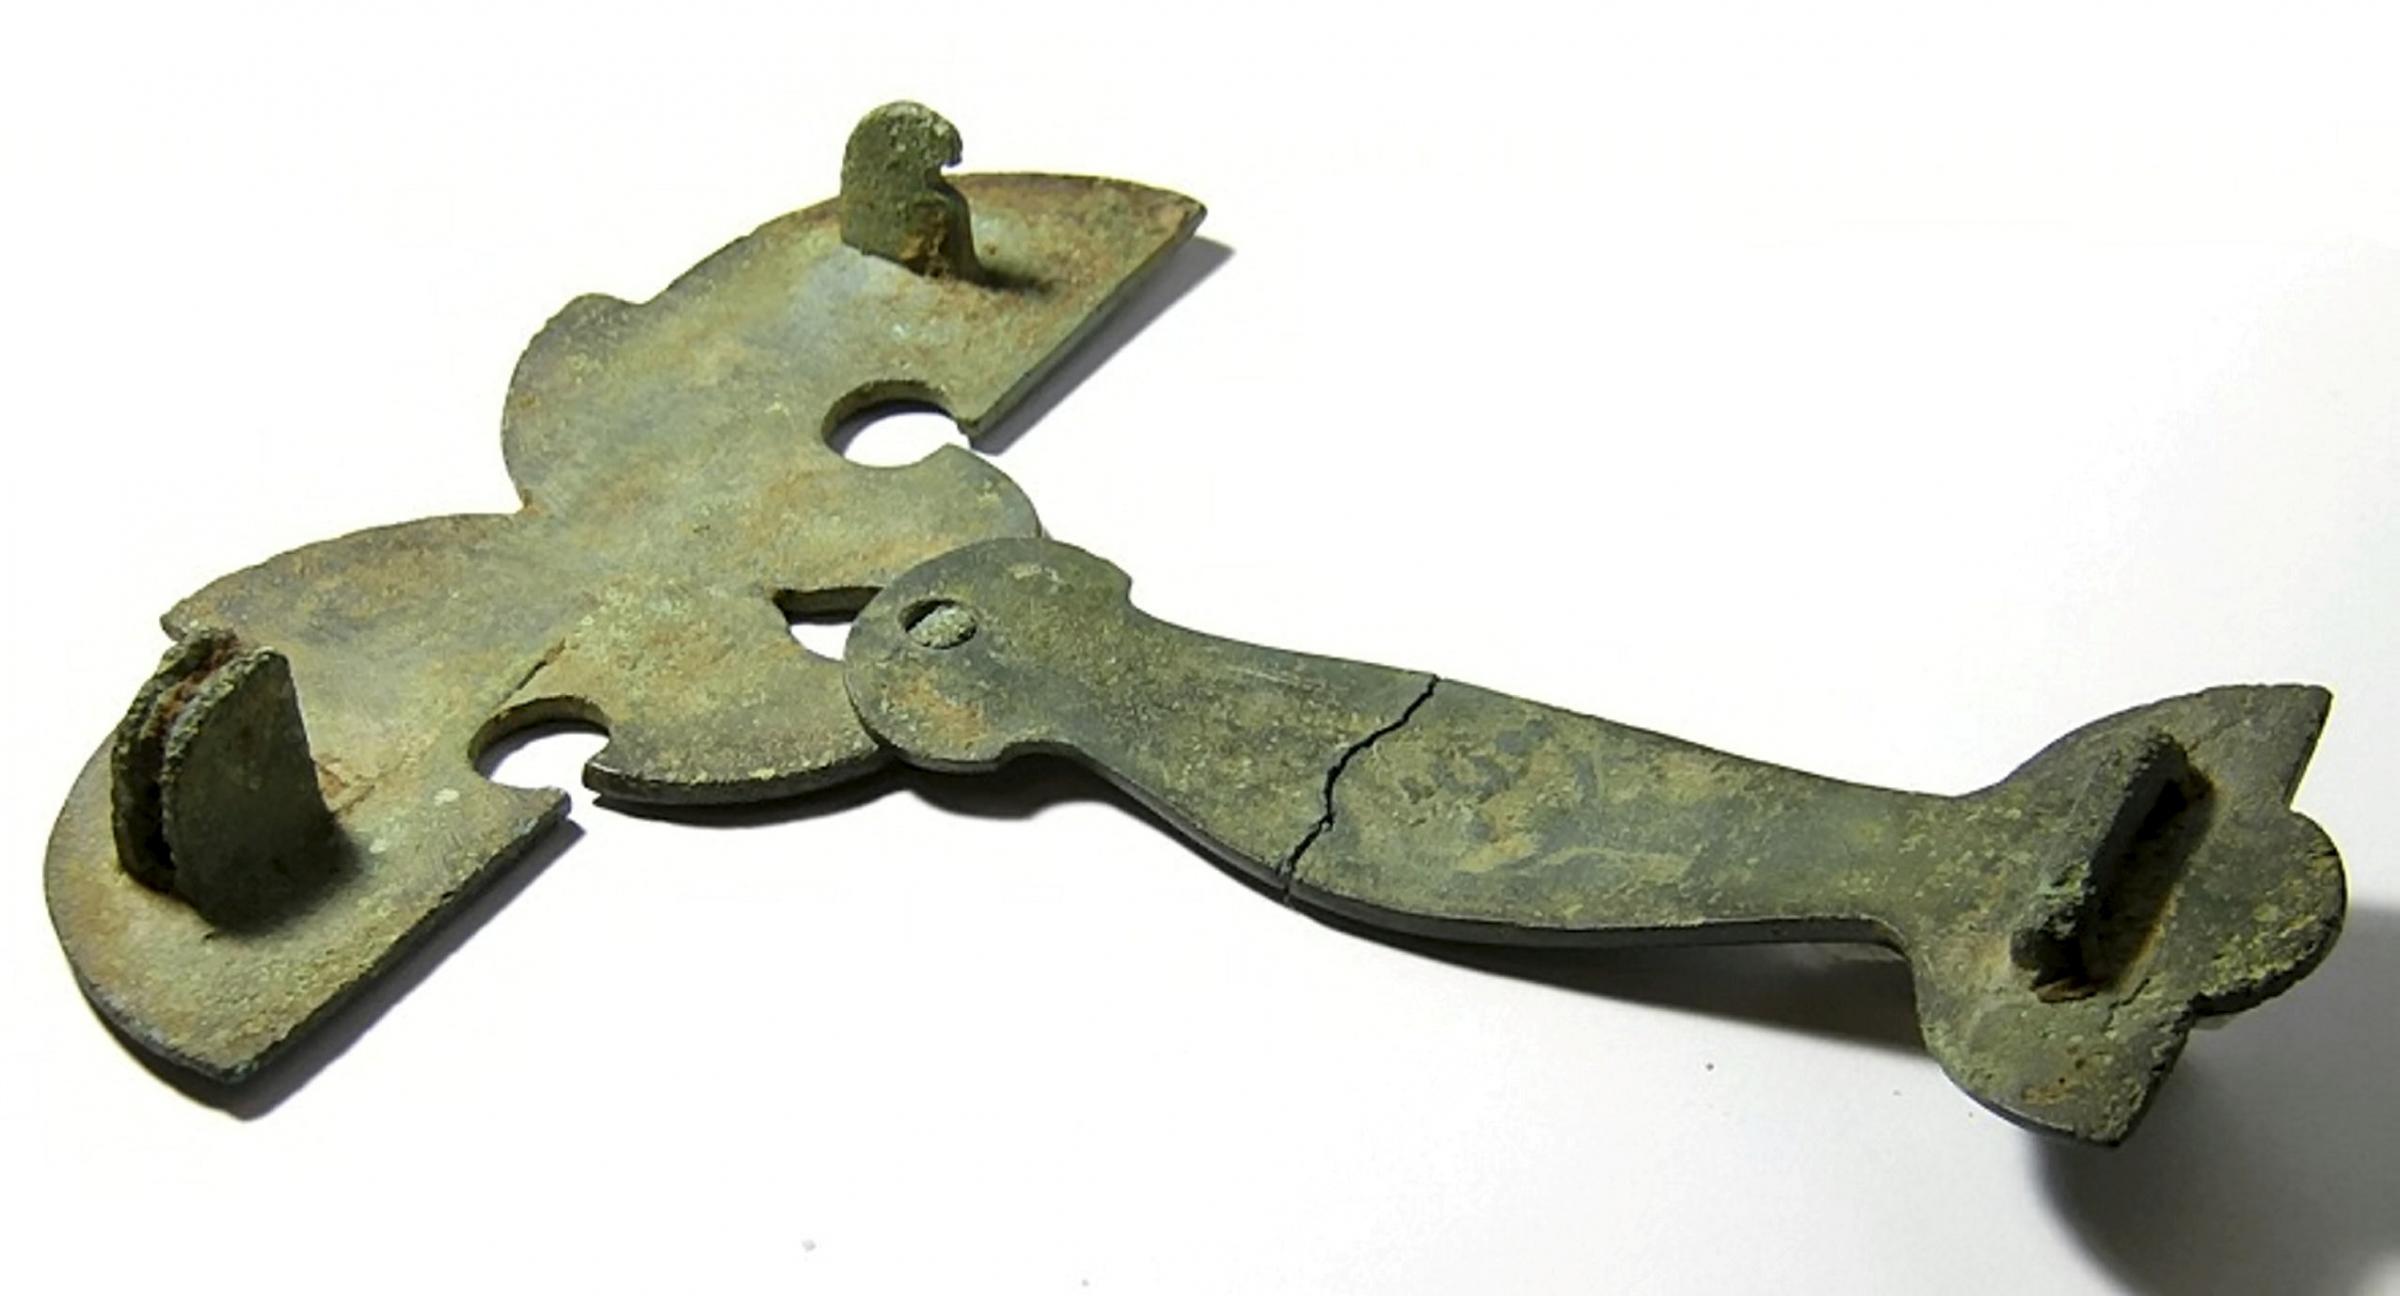 The item, a 2,000-year-old Celtic Chieftain’s chariot brooch, was discovered by 64-year-old Ray Pusey in Haddenham